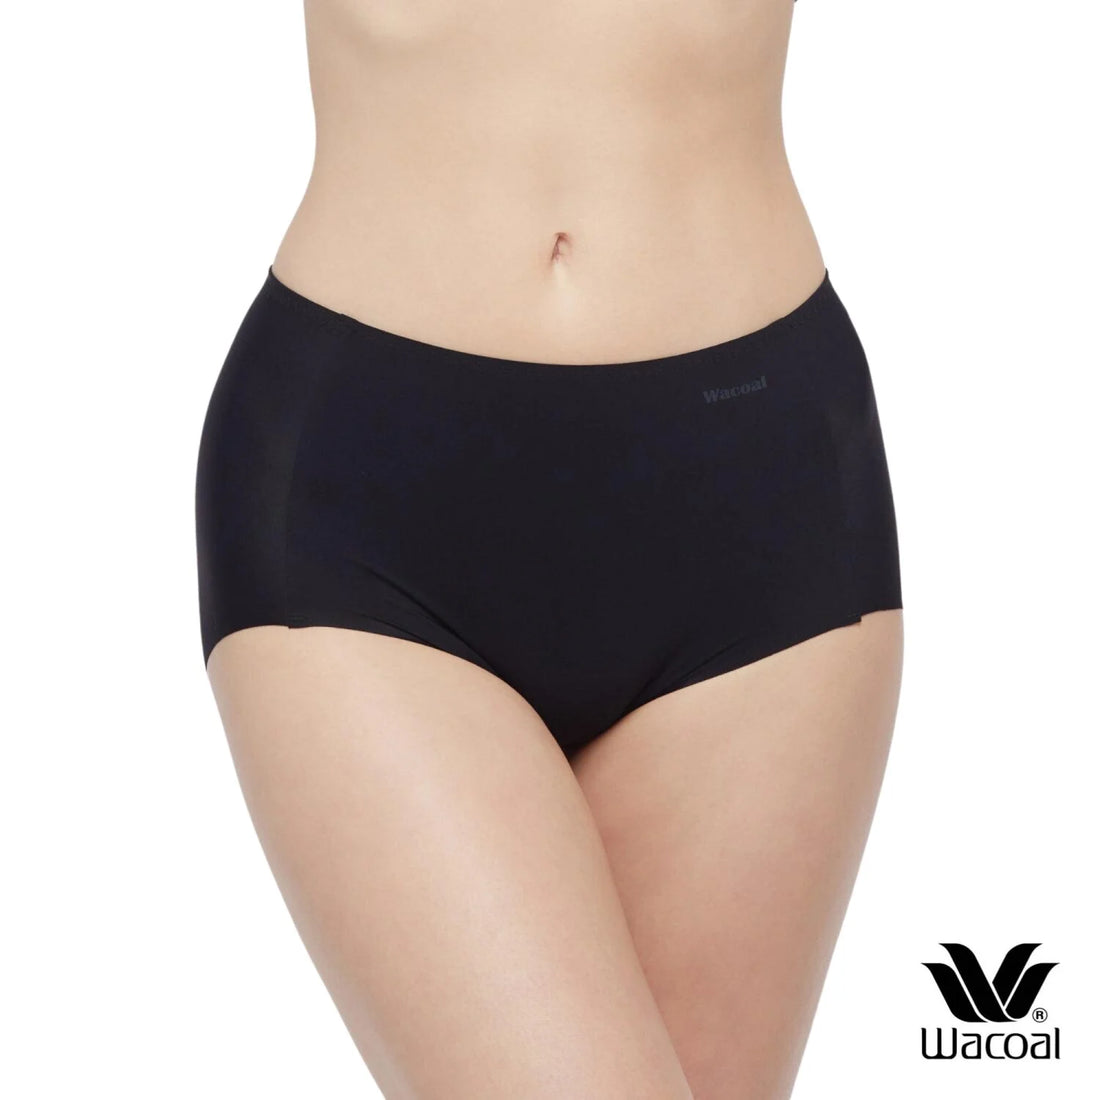 Wacoal Oh my nudes panty Seamless underwear, smooth, full body, set of 3 pieces, model WU4T99, assorted colors (beige-black-ovaltine).